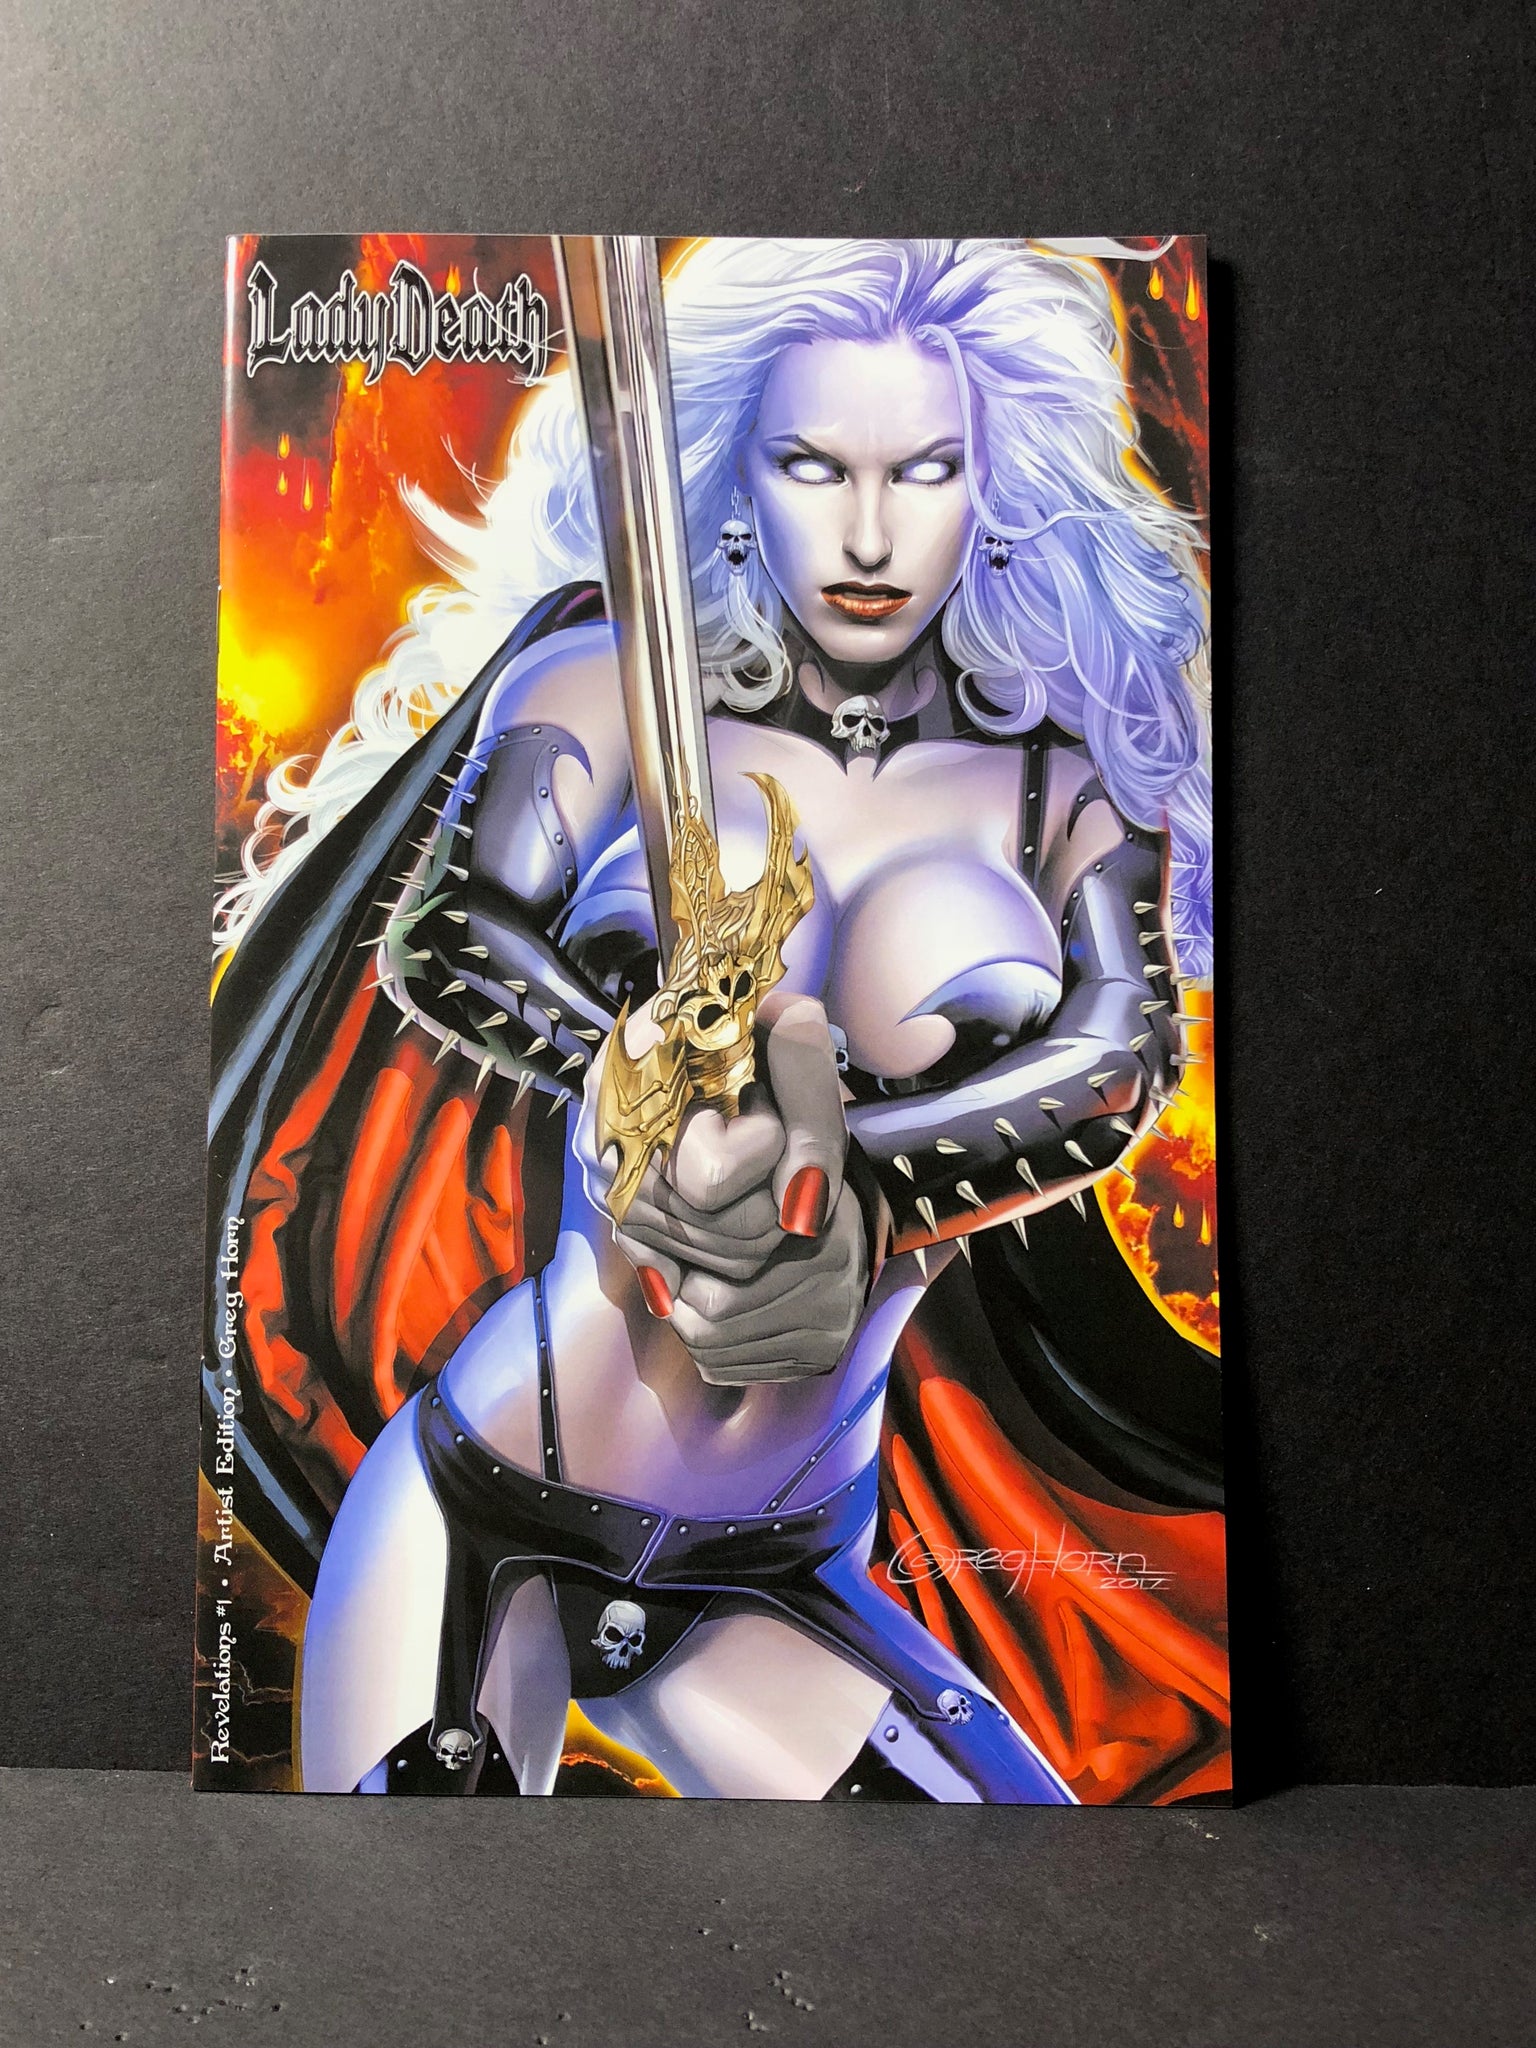 Lady Death Revelations #1 comic book Nice and naughty versions - Limited print options